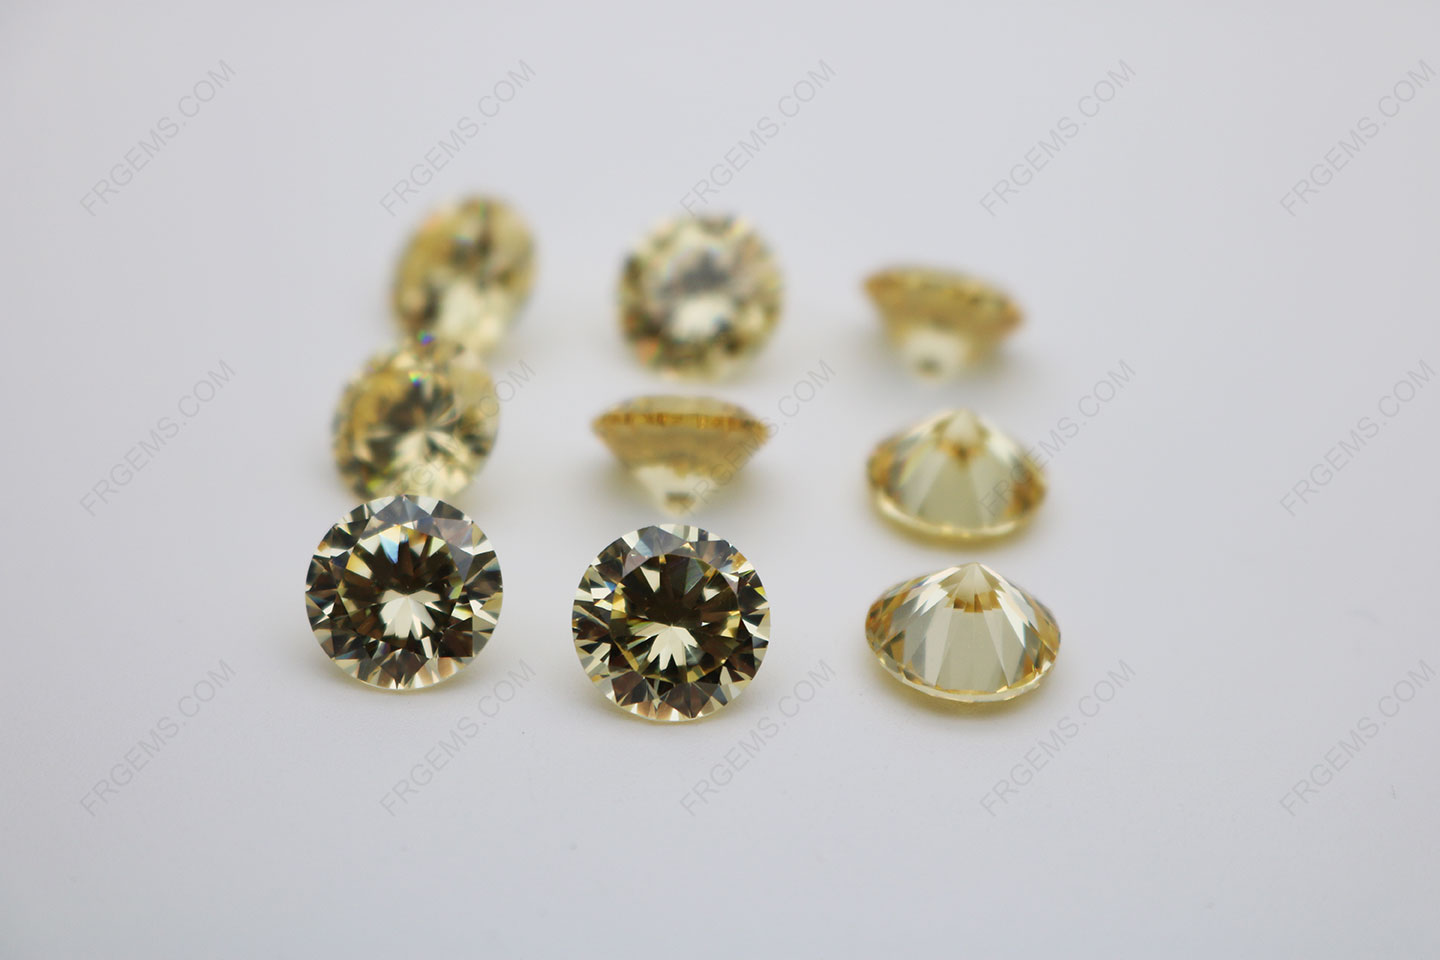 Cubic_Zirconia_Canary_Yellow_Round_Diamond_faceted_Cut_10mm_stones_IMG_0239